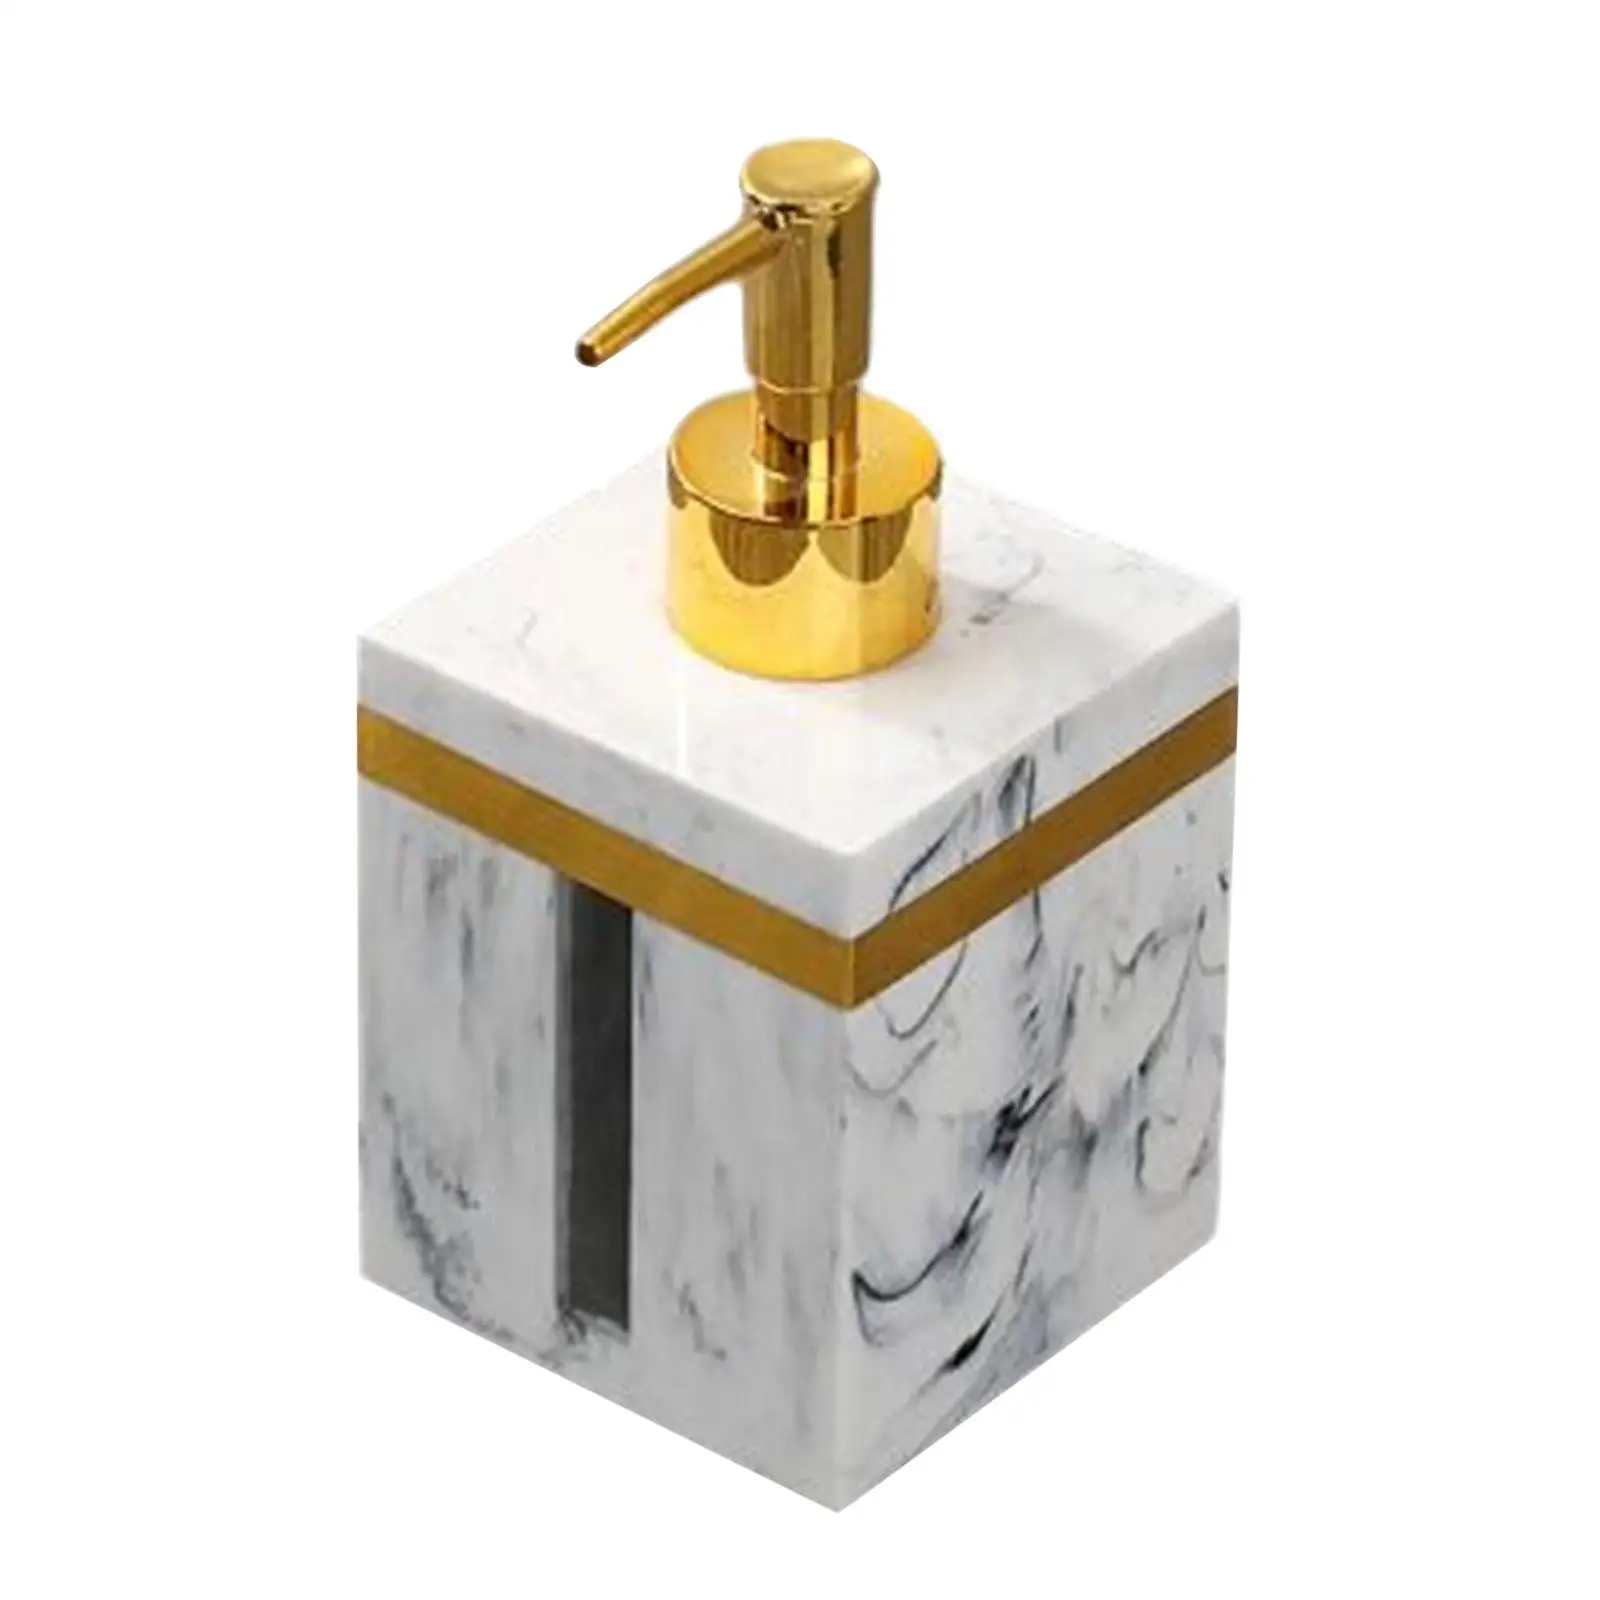 Marble Texture Manual Soap Dispenser Resin Empty Sturdy Hand Soap Liquid Dispenser for Laundry Room Kitchen Home Bathroom